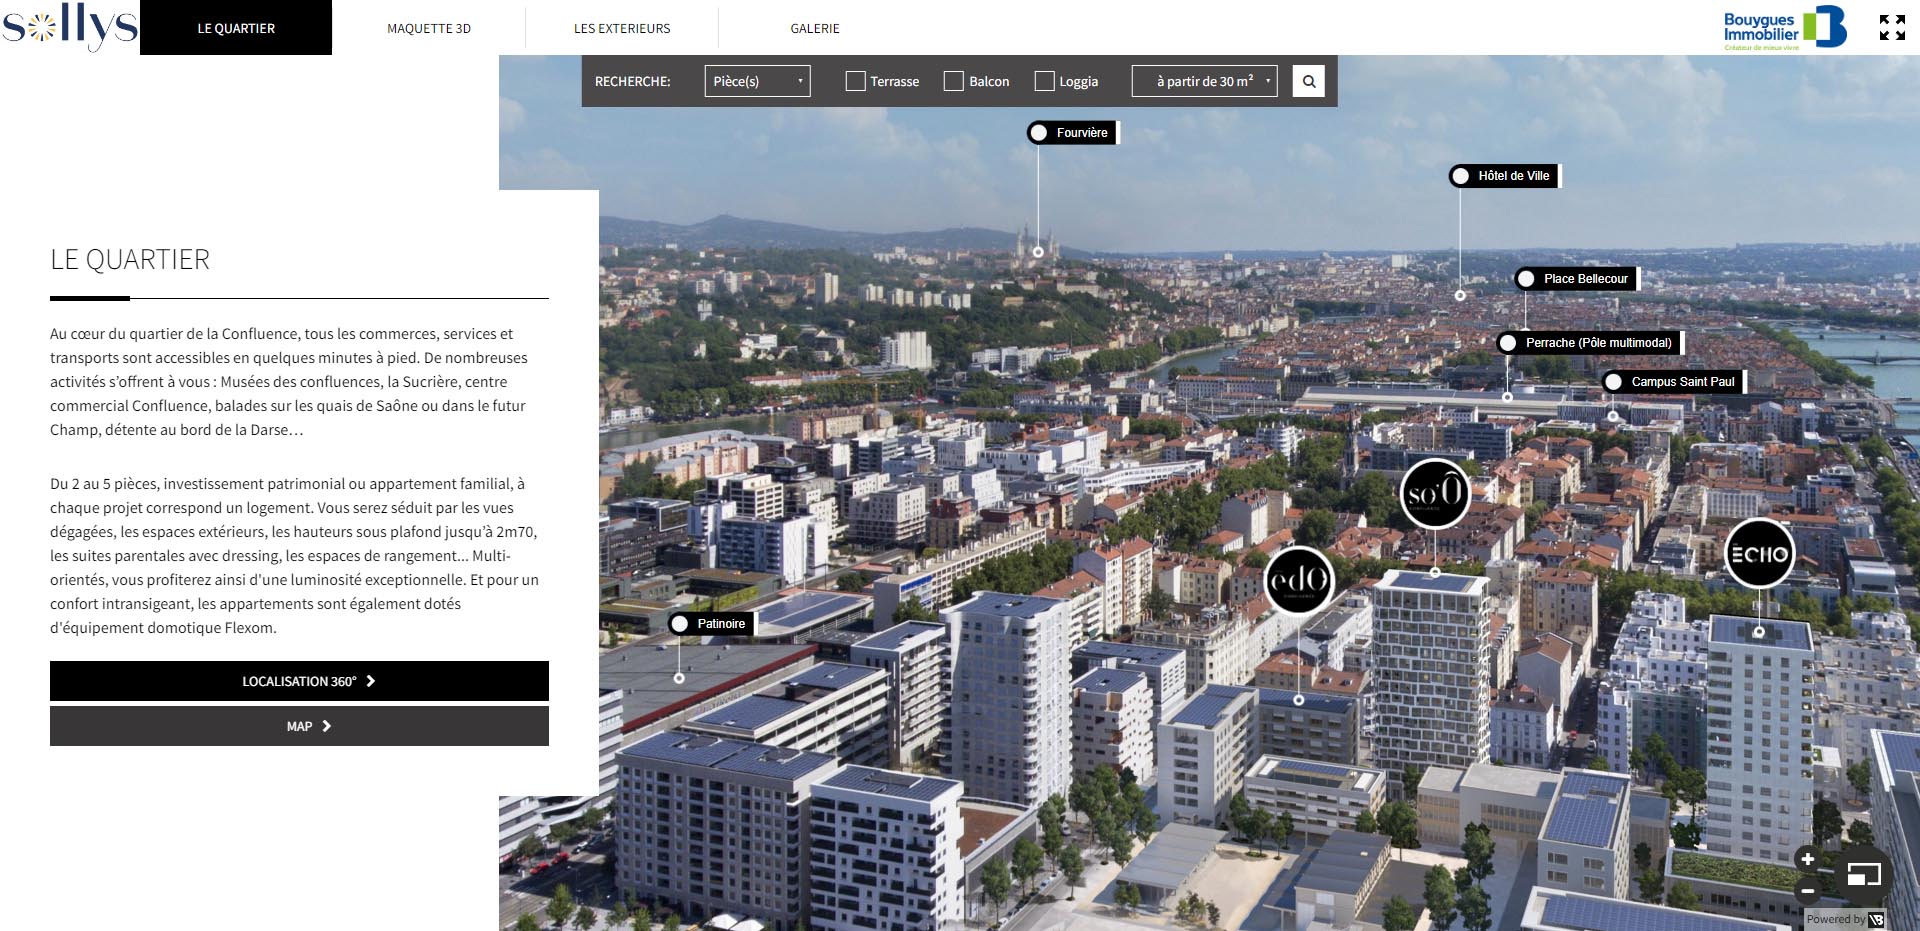 Sollys - Bouygues Immobilier - Photolocalisation 360°